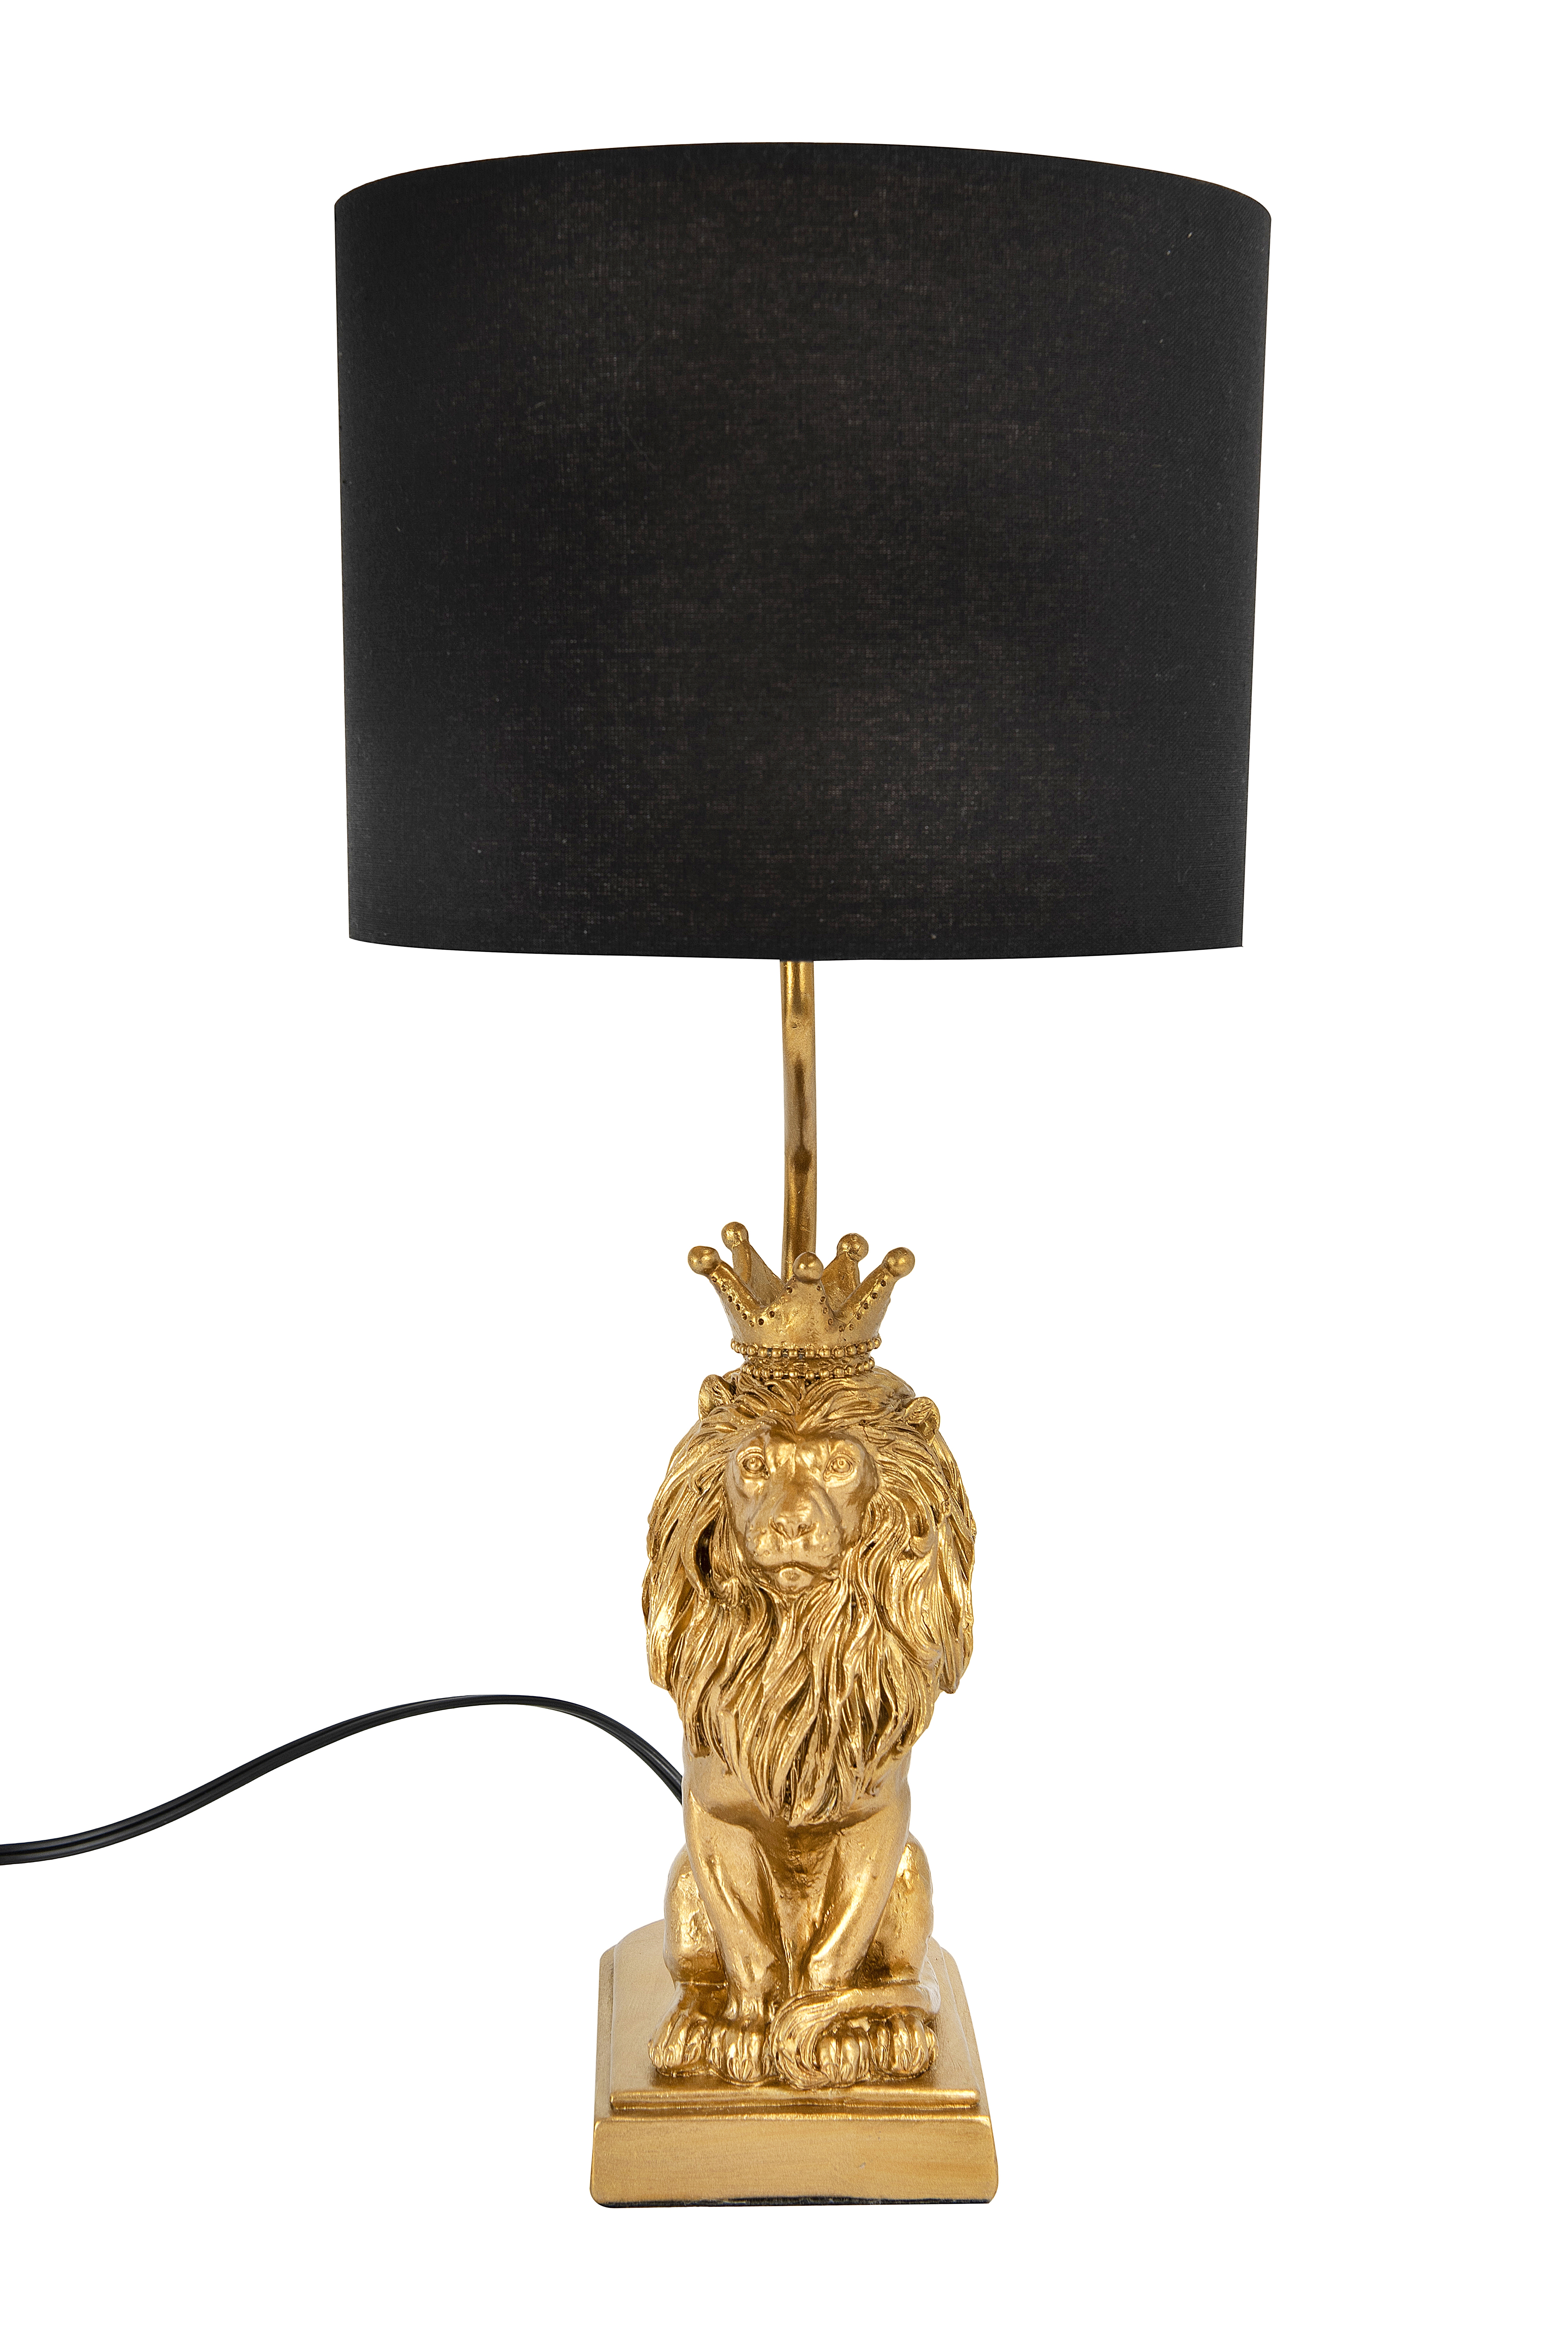 Lion Shaped Table Lamp with Black Shade - Image 0